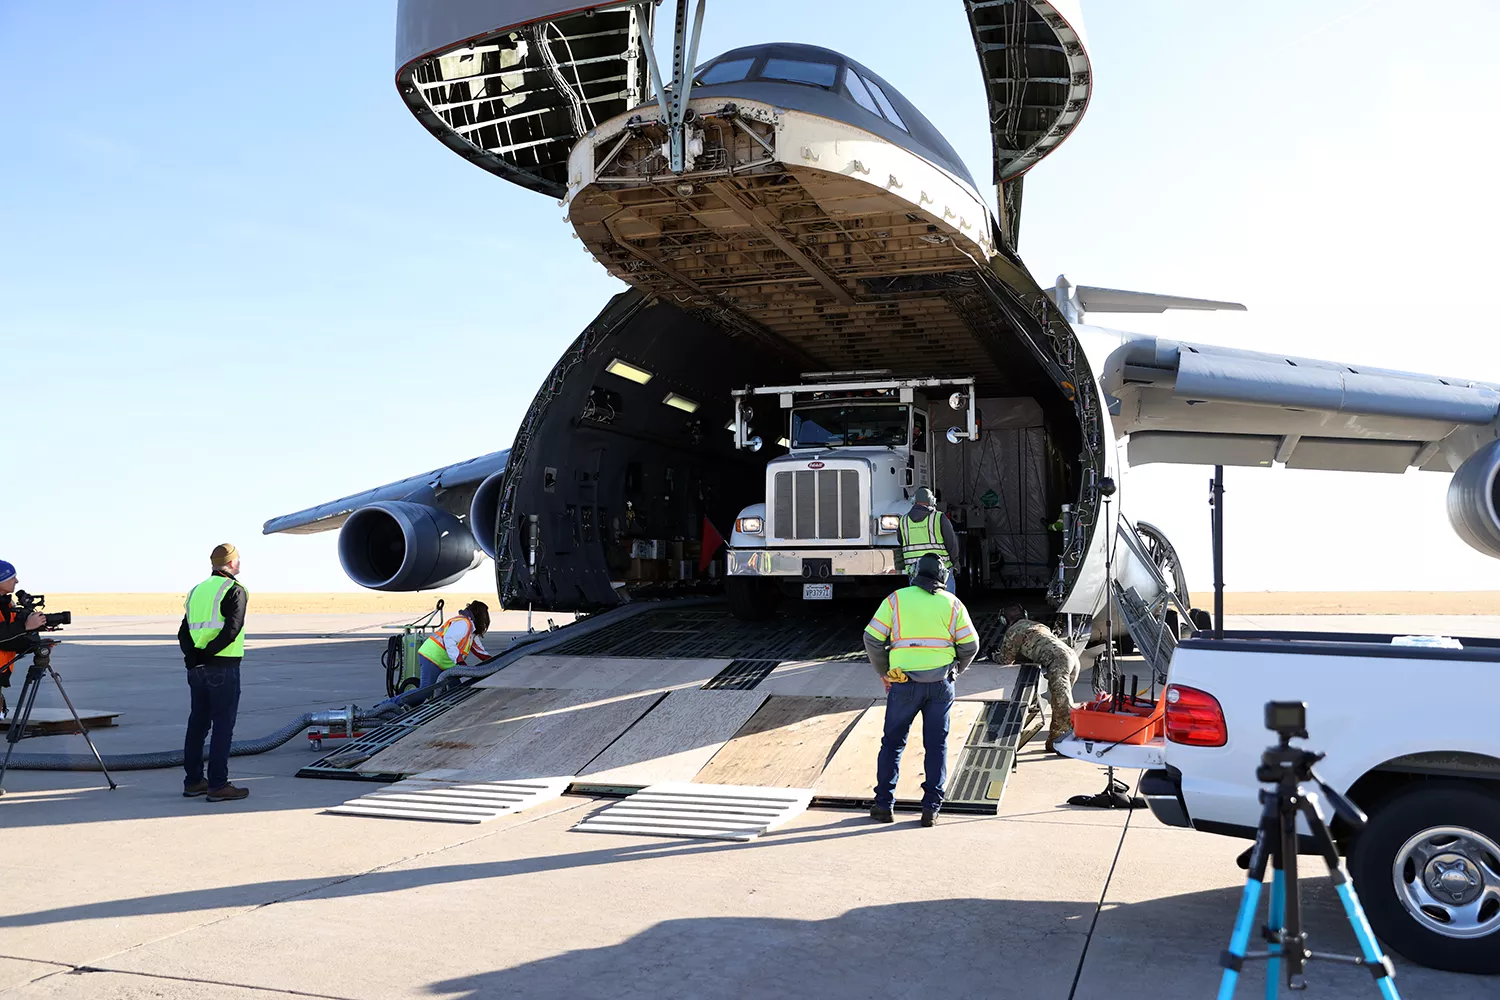 GOES-T being loaded onto a C-5M Super Galaxy aircraft that will fly it to the Kennedy Space Center in Florida.